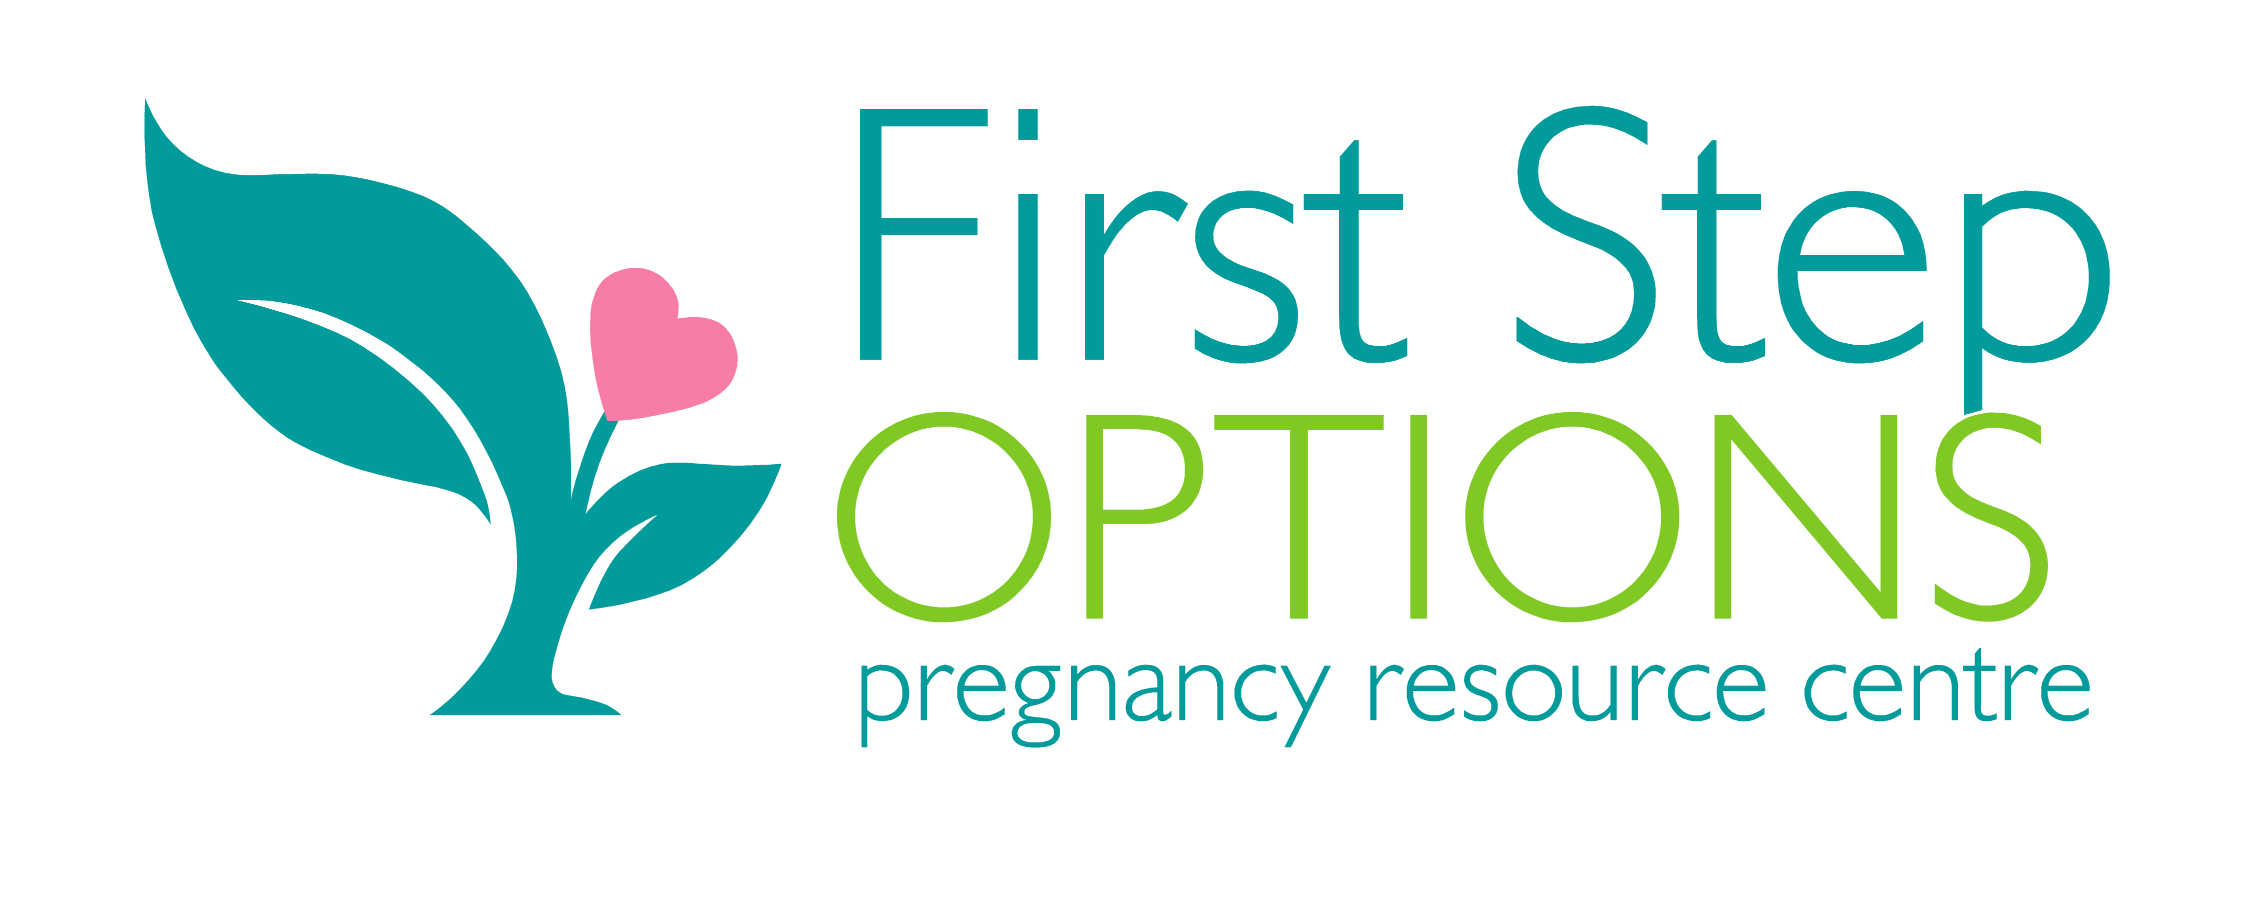 First Step Options logo